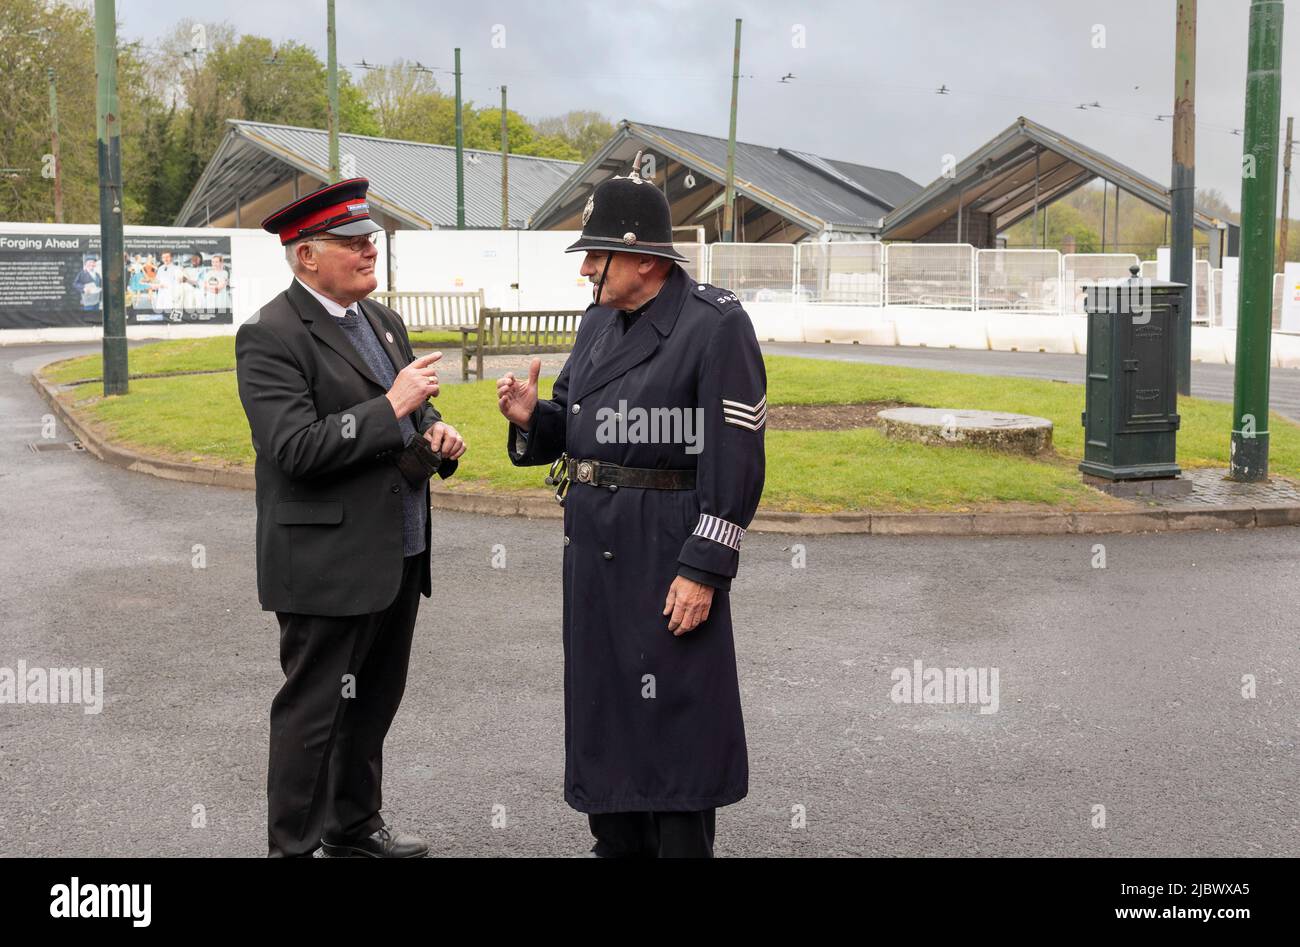 Dudley, West Midlands-United Kingdom July 13, 2019, police sergeant talking to a 1940's bus conductor Stock Photo